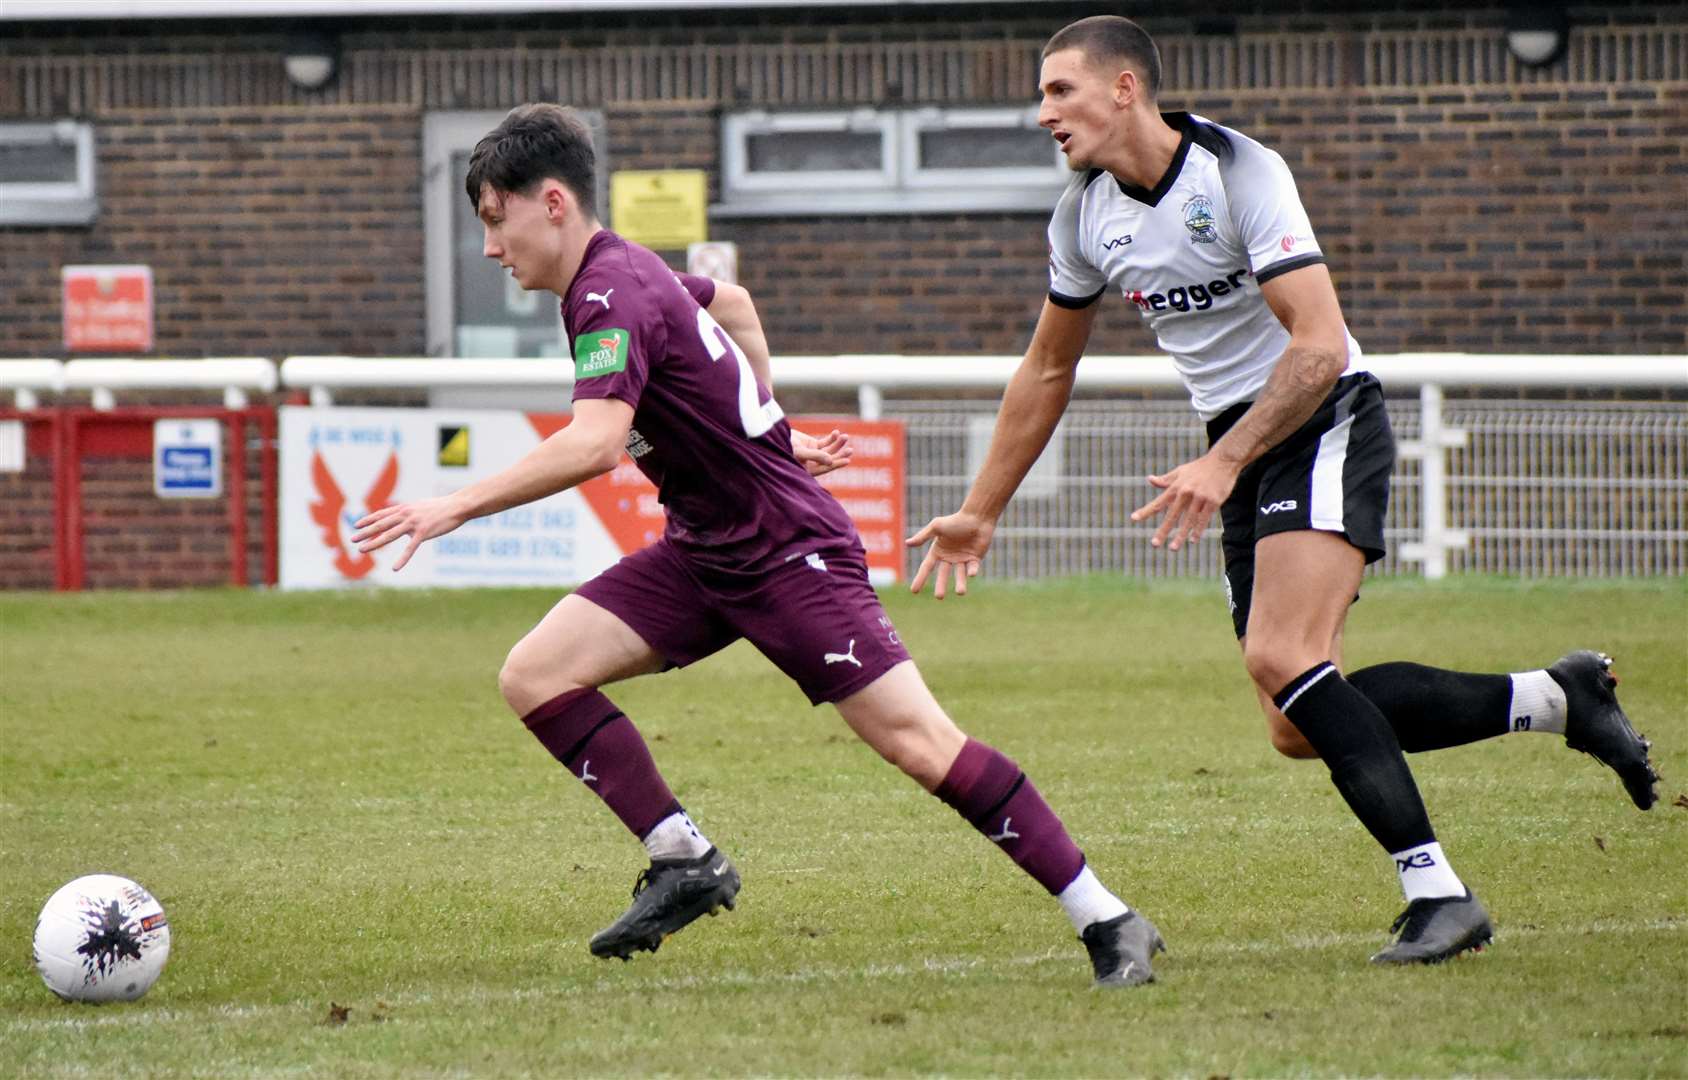 First-half Dartford scorer Olly Box gets ahead of Dover defender Scott Holding during their 2-1 weekend derby win at Dover. Picture: Randolph File